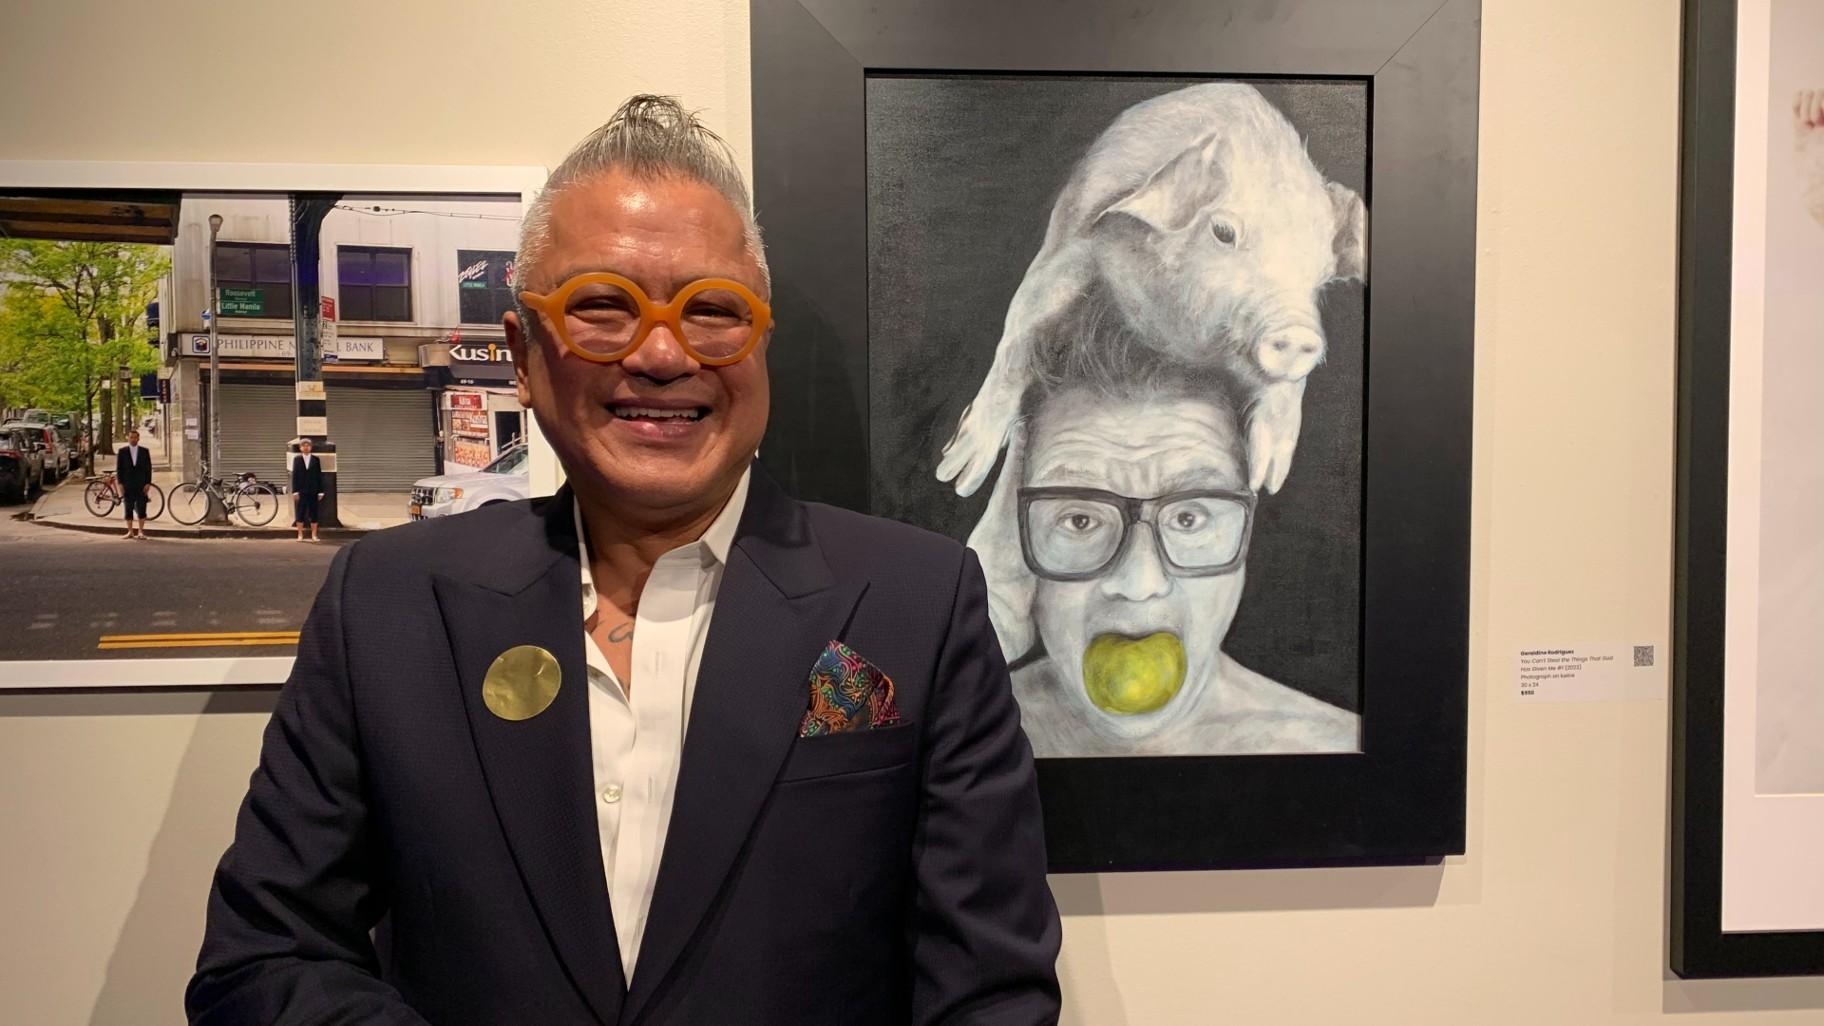 Artist and curator Cesar Conde with his artwork “Pig-Headed” at the “More than Lumpia” art exhibit on Oct. 6 at the Epiphany Center for the Arts. (WTTW News / Eunice Alpasan)